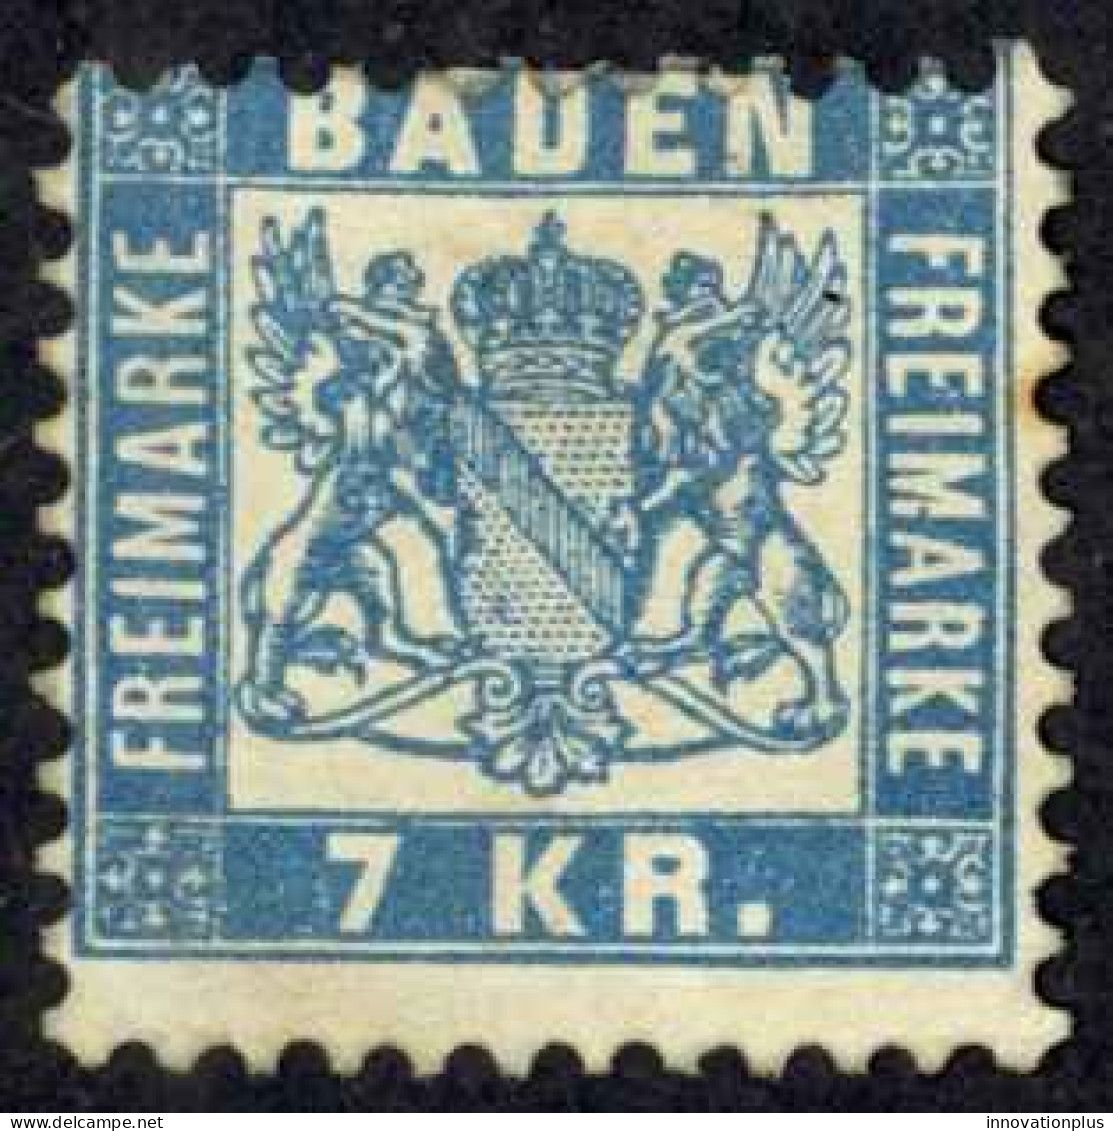 Germany Baden Sc# 28 MH 1868 7kr Dull Blue Coat Of Arms - Nuovi